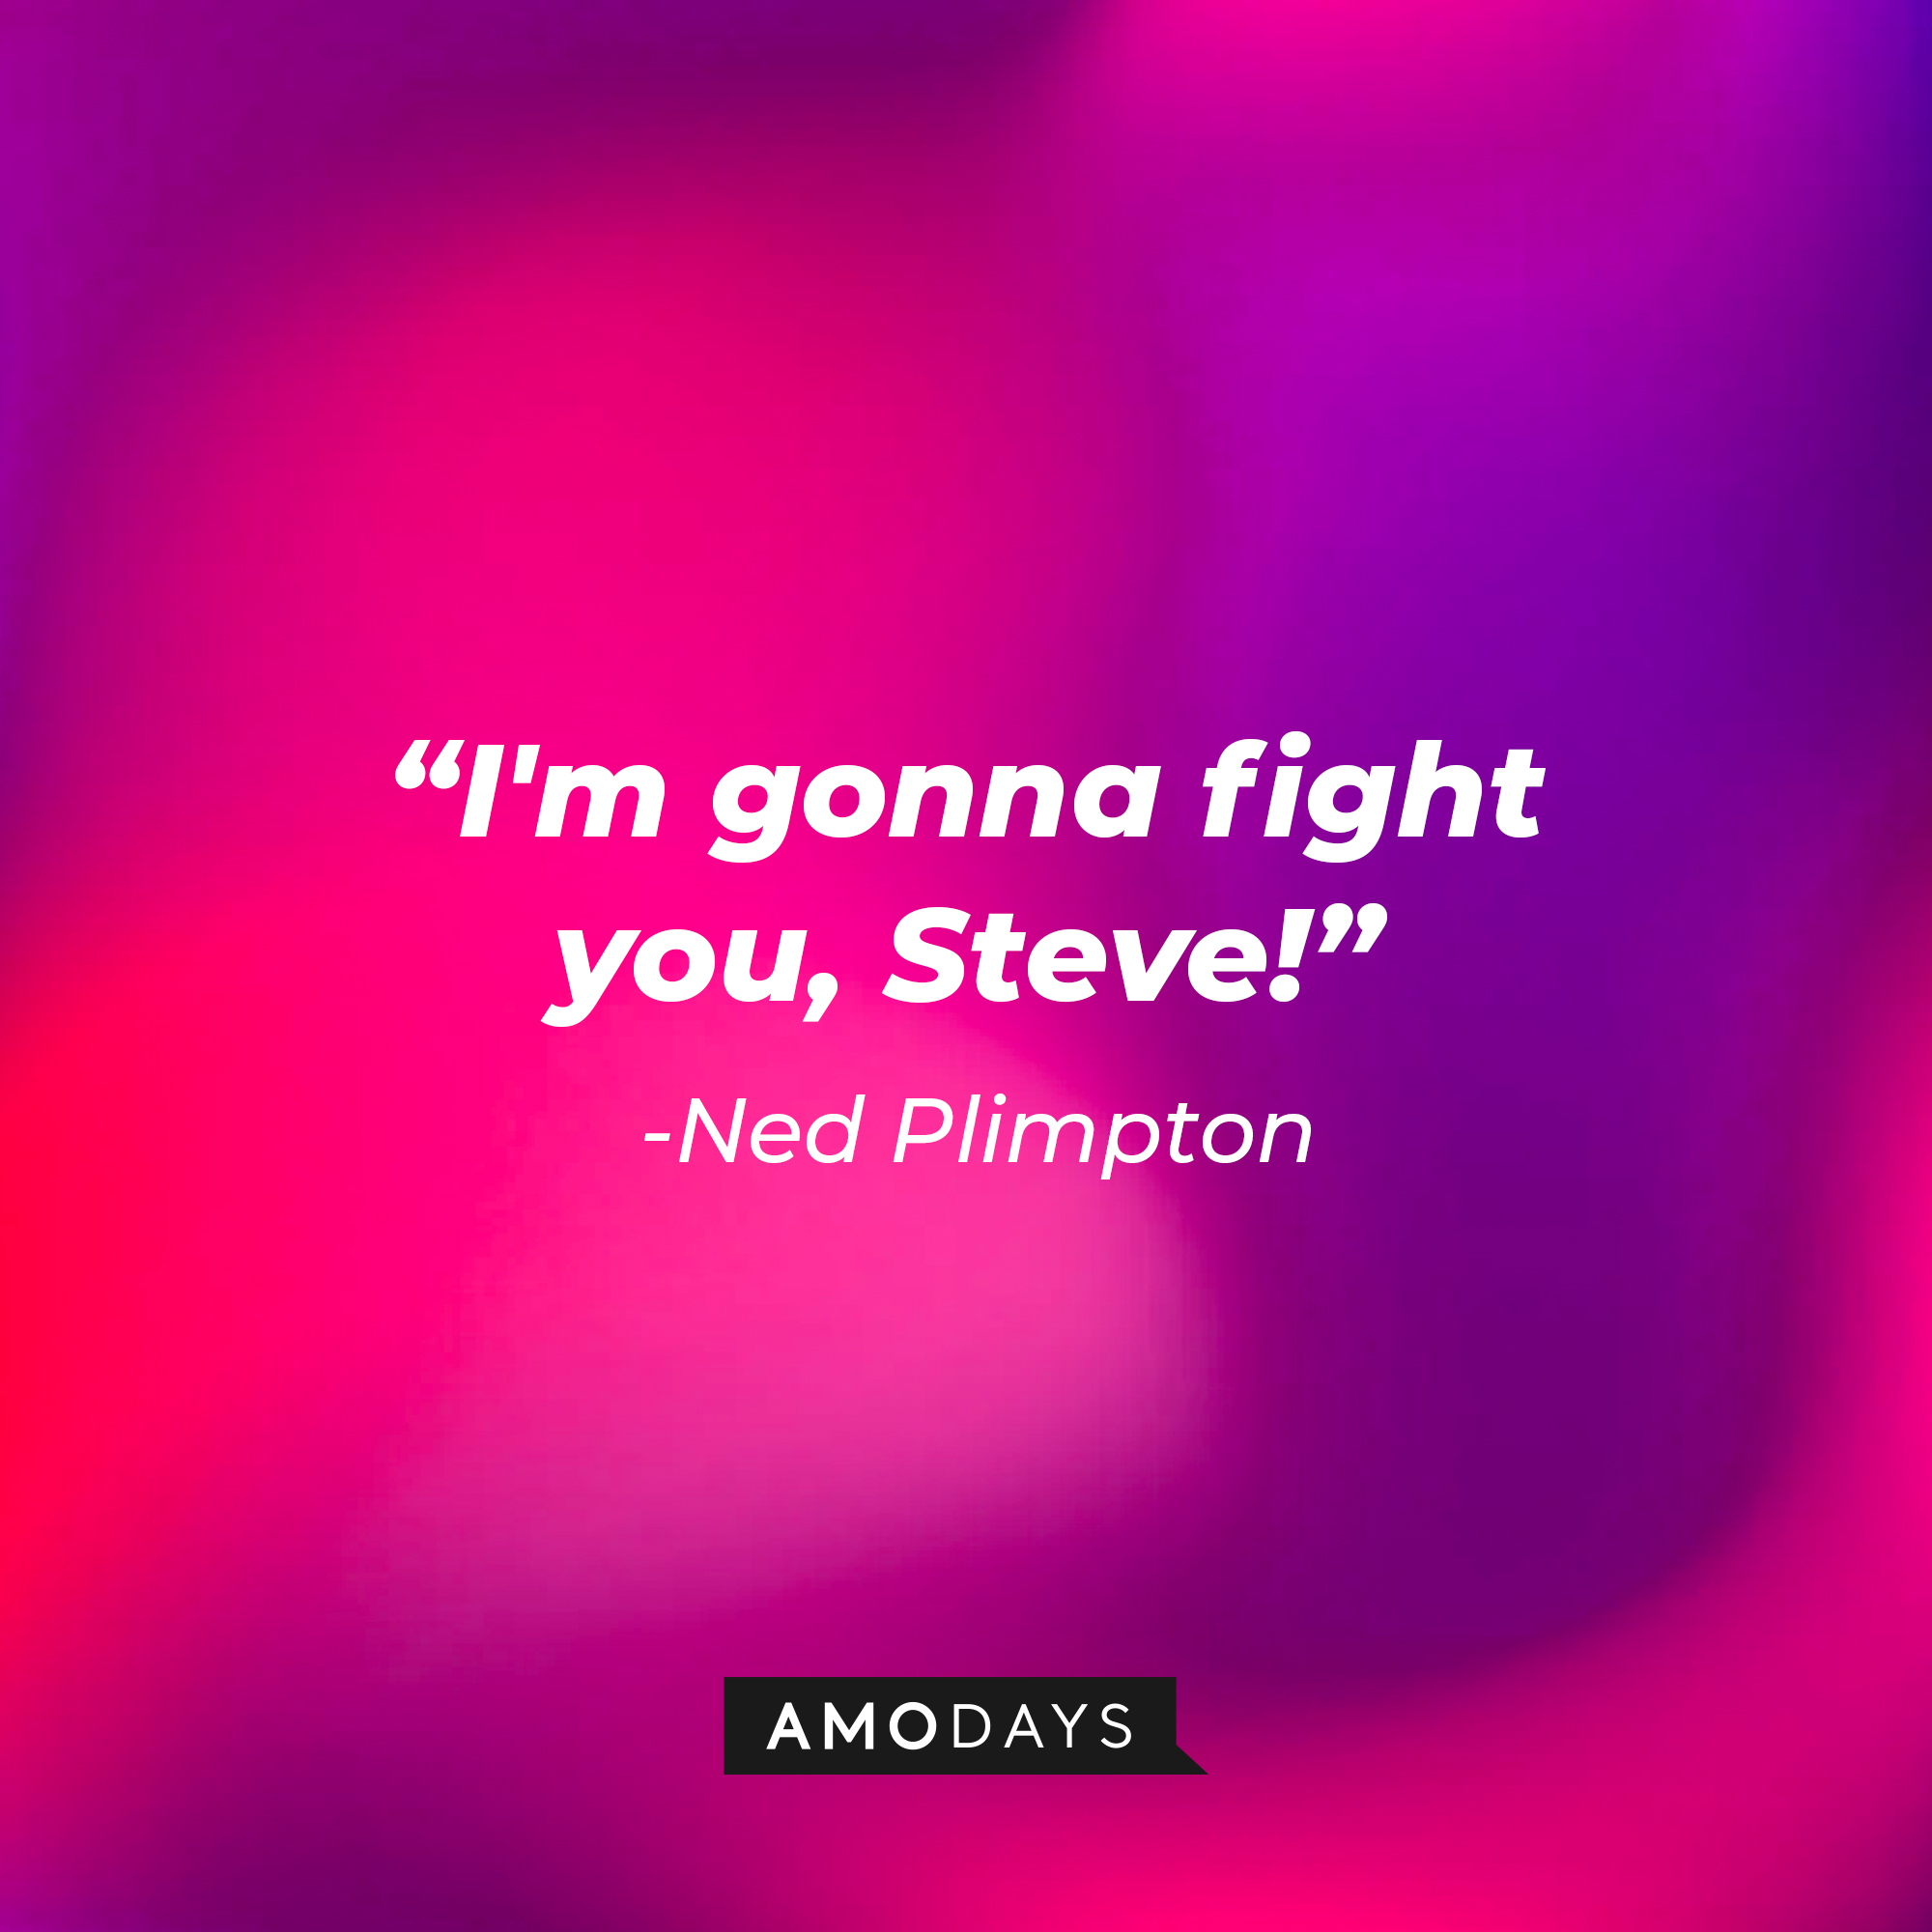 A photo with the quote, "I'm gonna fight you, Steve!" | Source: Amodays